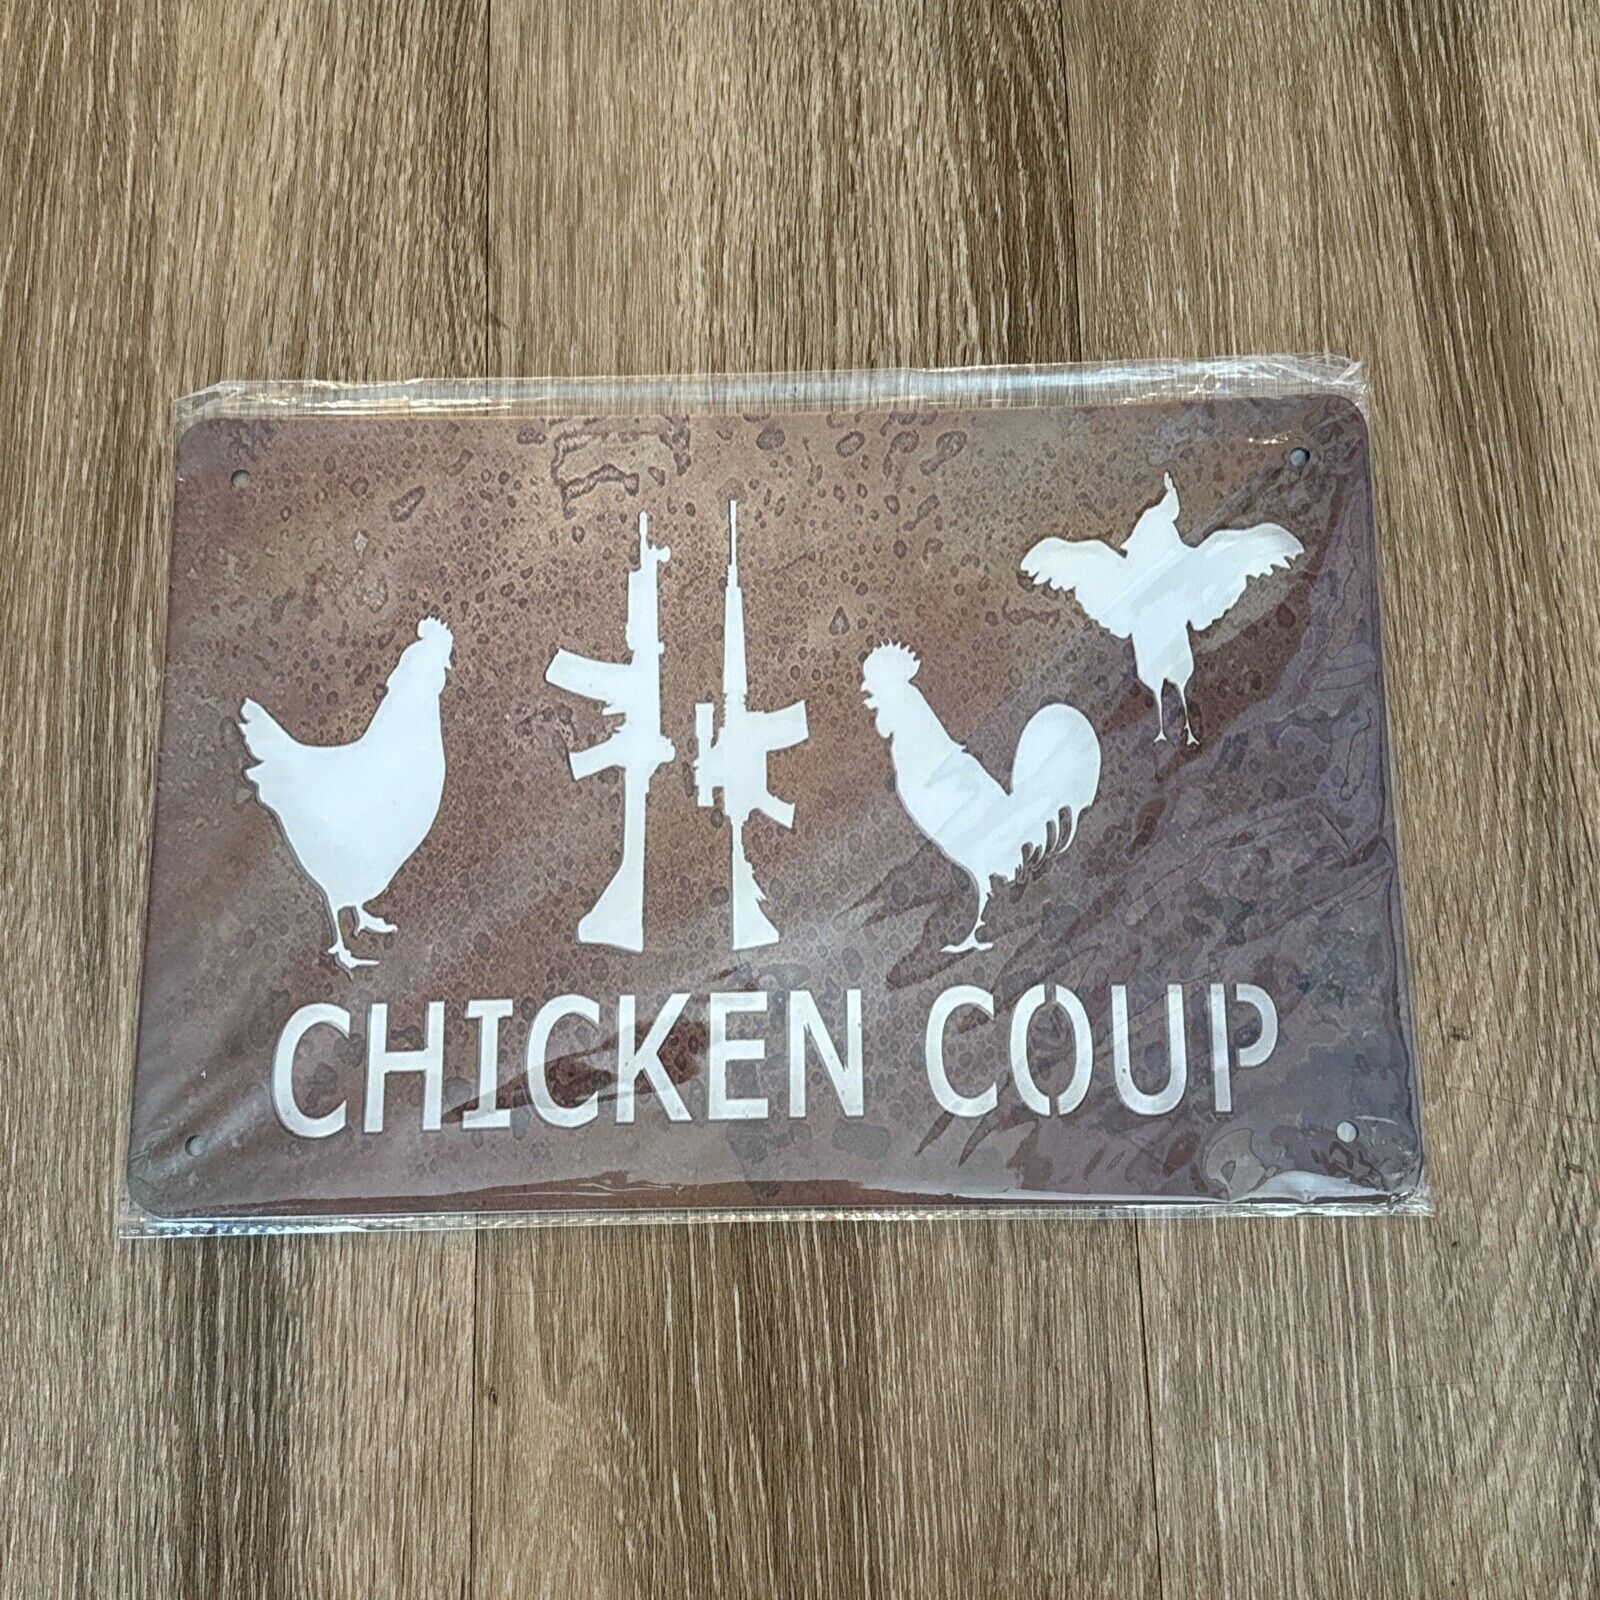 Chicken Coup Vintage Metal Sign